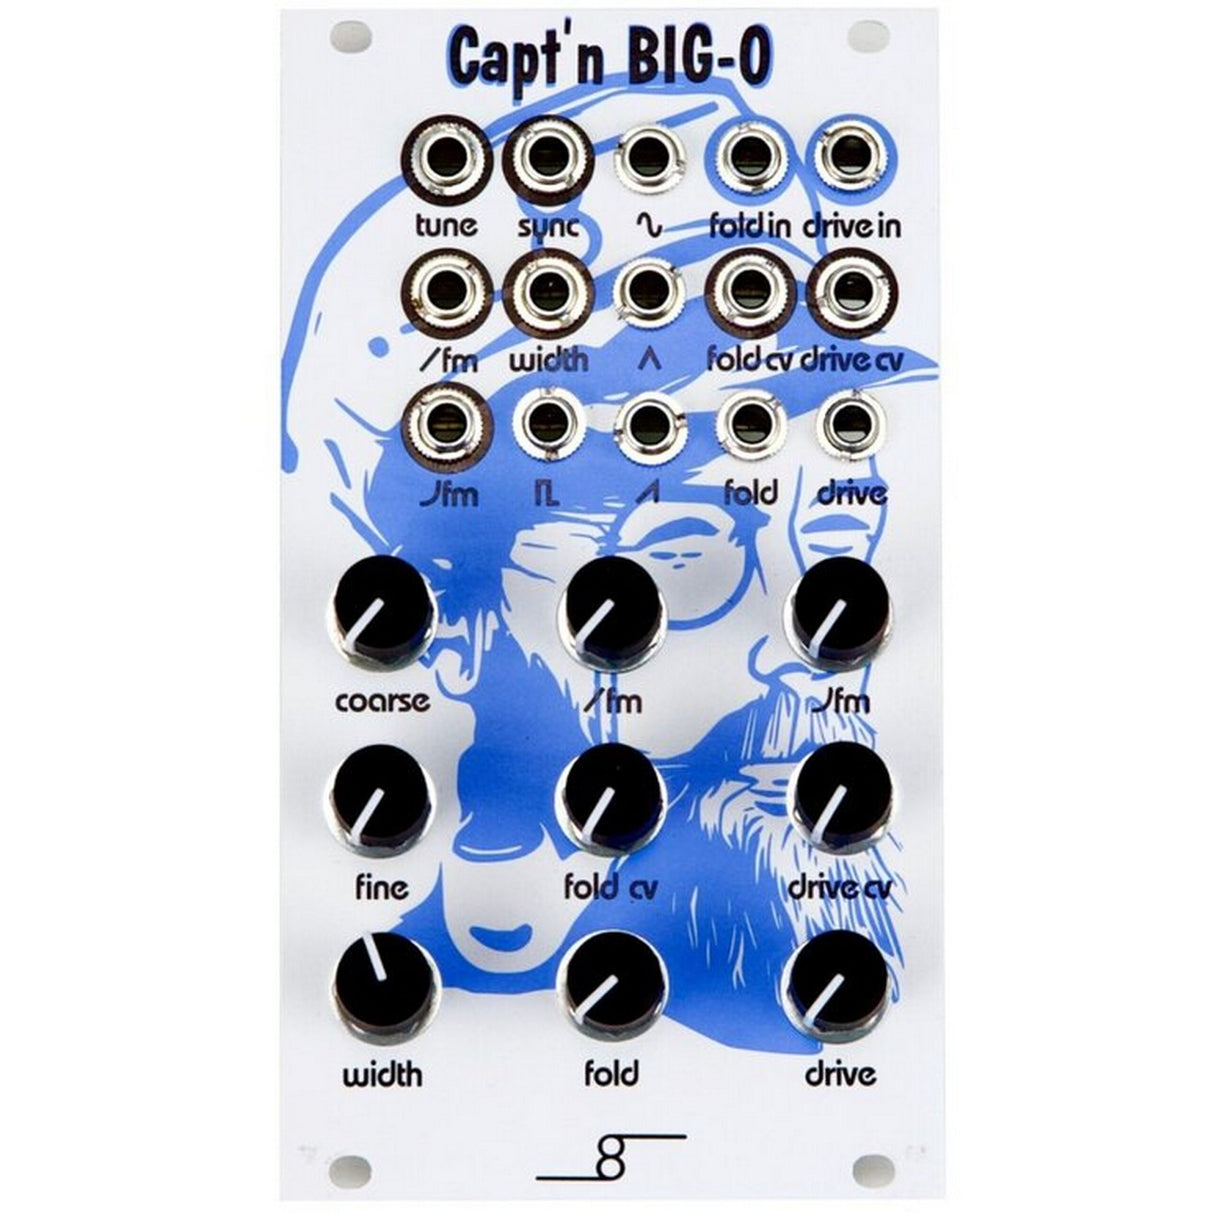 Cre8audio Capt'n Big-O Analog VCO Module with Waveshaping